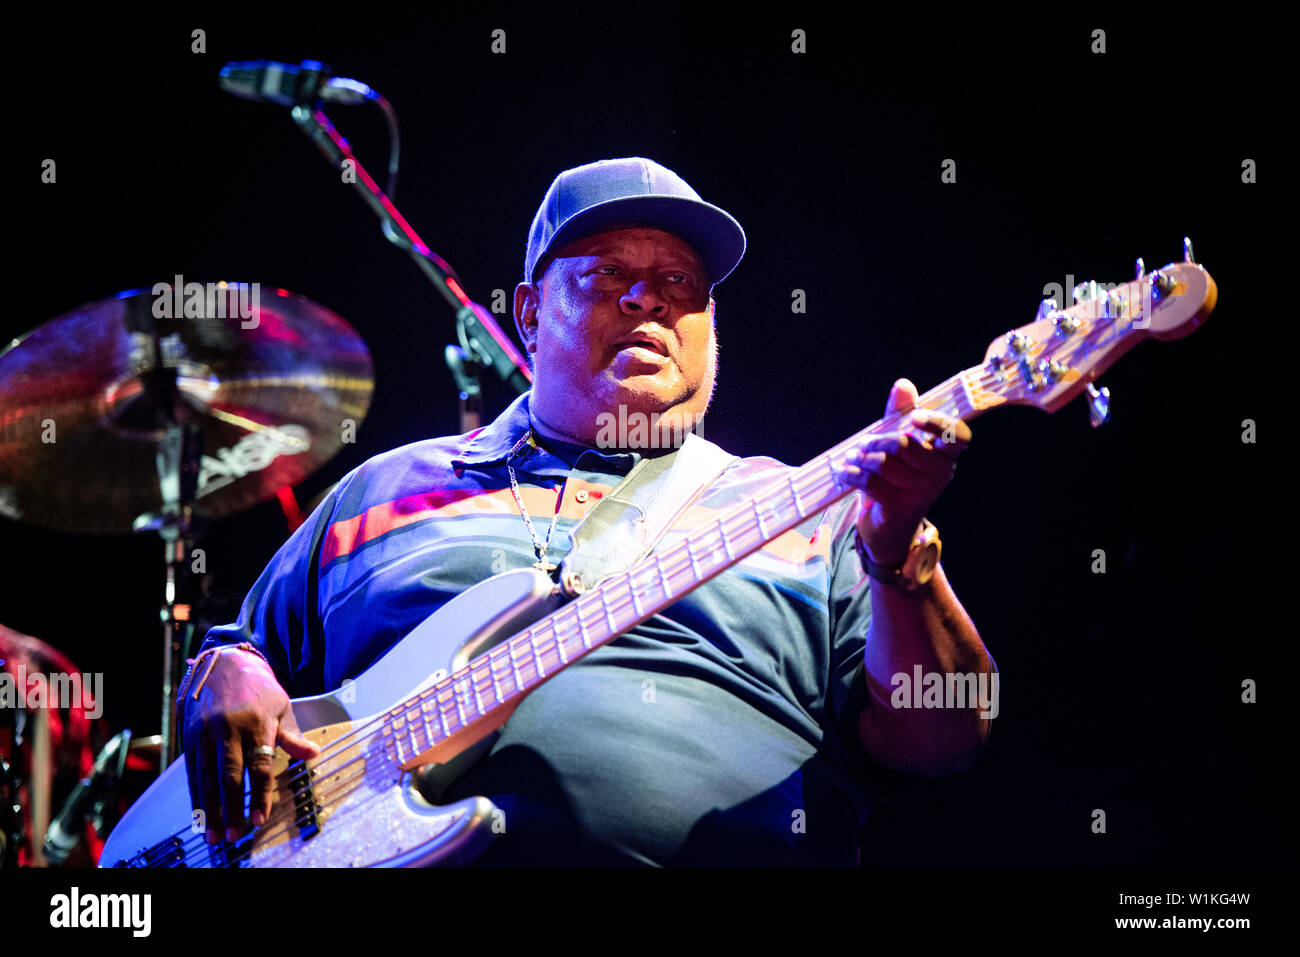 Juan Nelson, bassist of the Innocent Criminals, performing live on stage together with Ben Harper at the Gruvillage Festival in Grugliasco, near Turin Stock Photo